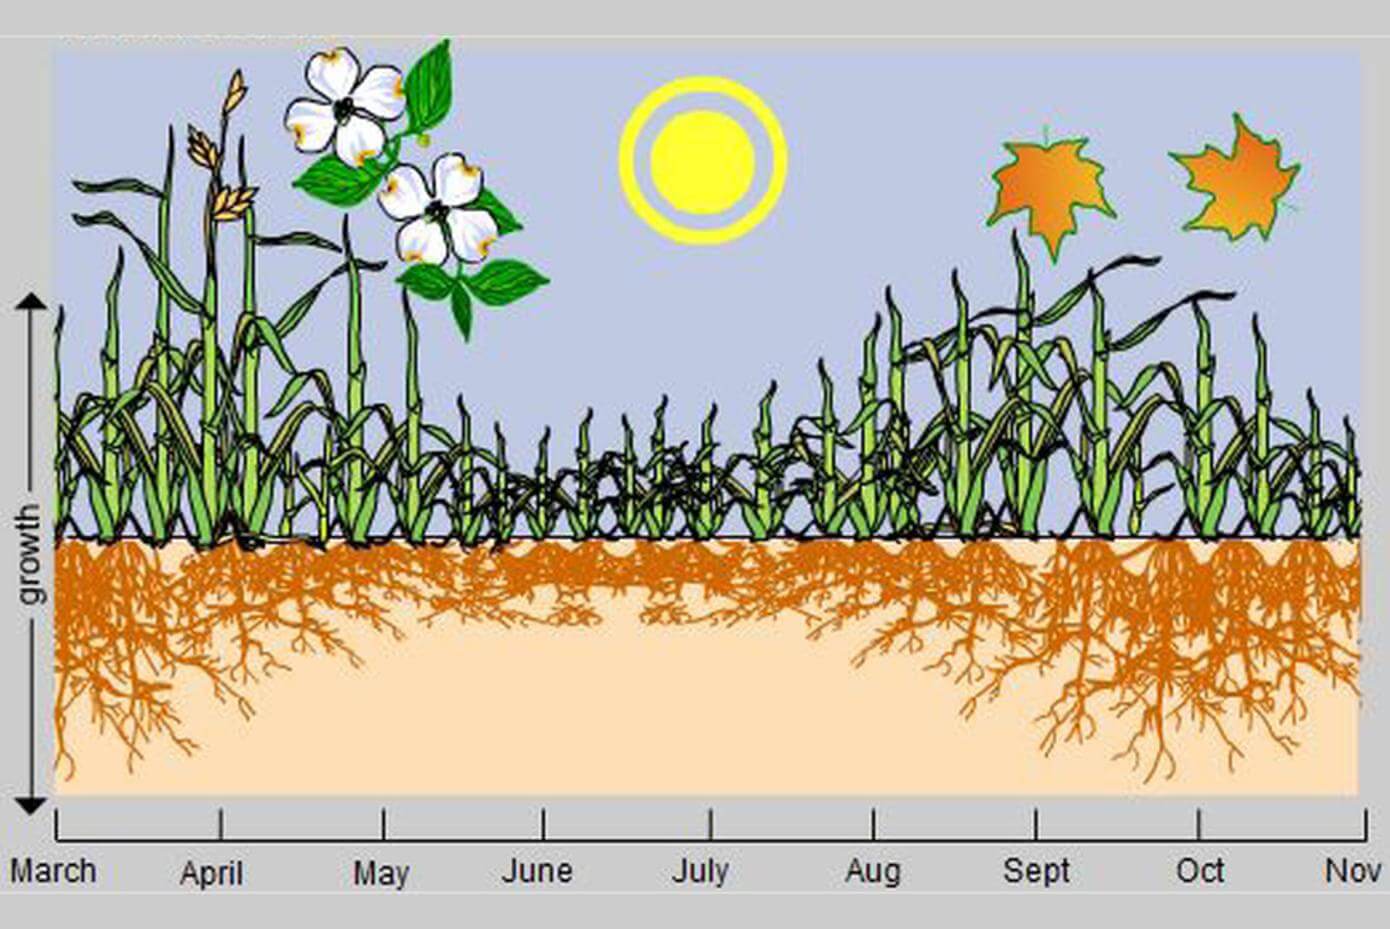 Illustration showing cool season grass growth patterns throughout the seasons.